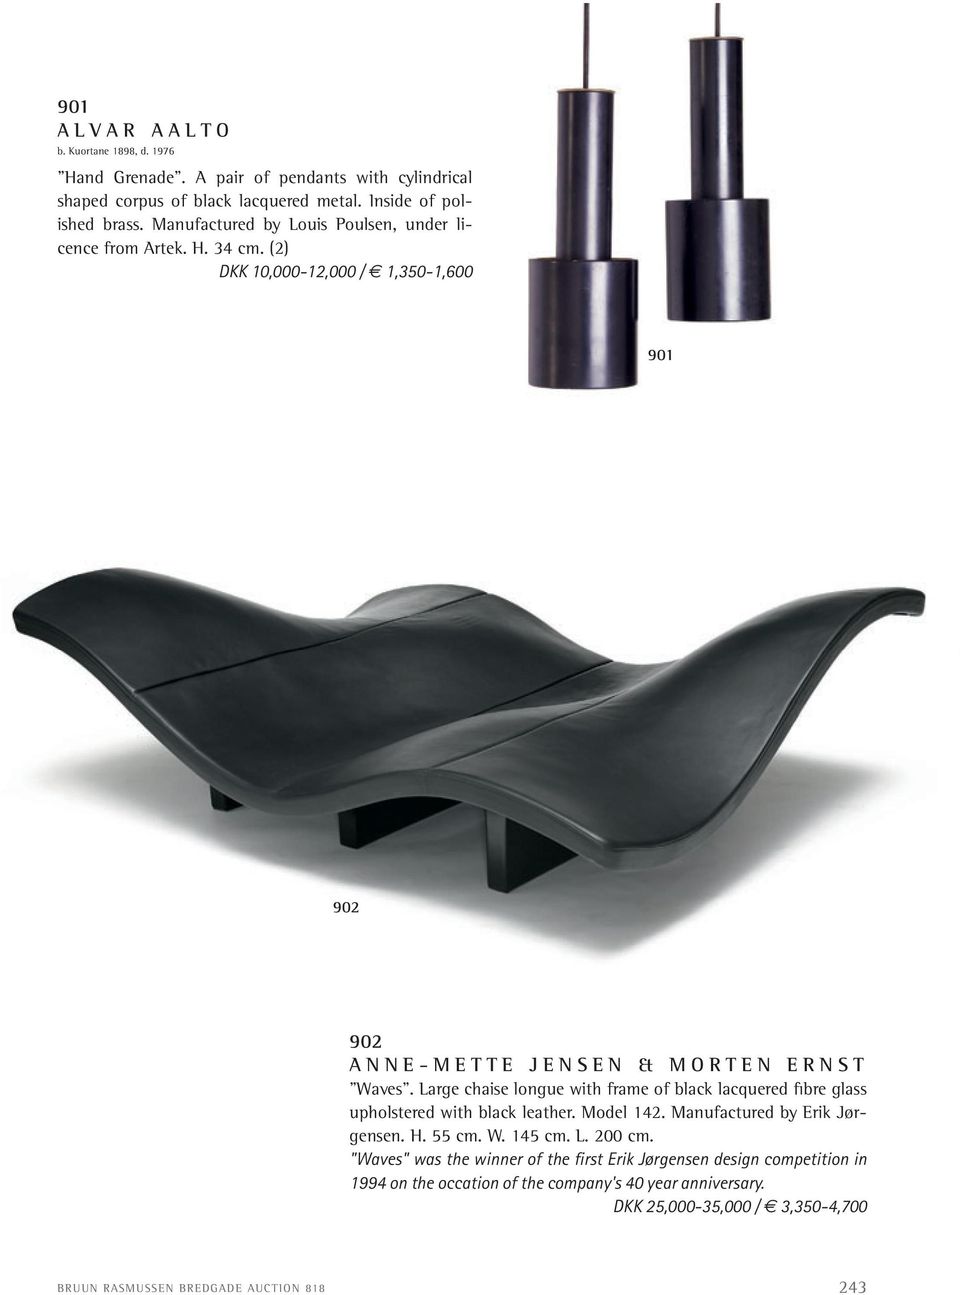 Large chaise longue with frame of black lacquered fibre glass upholstered with black leather. Model 142. Manufactured by Erik Jørgensen. H. 55 cm. W. 145 cm. L. 200 cm.